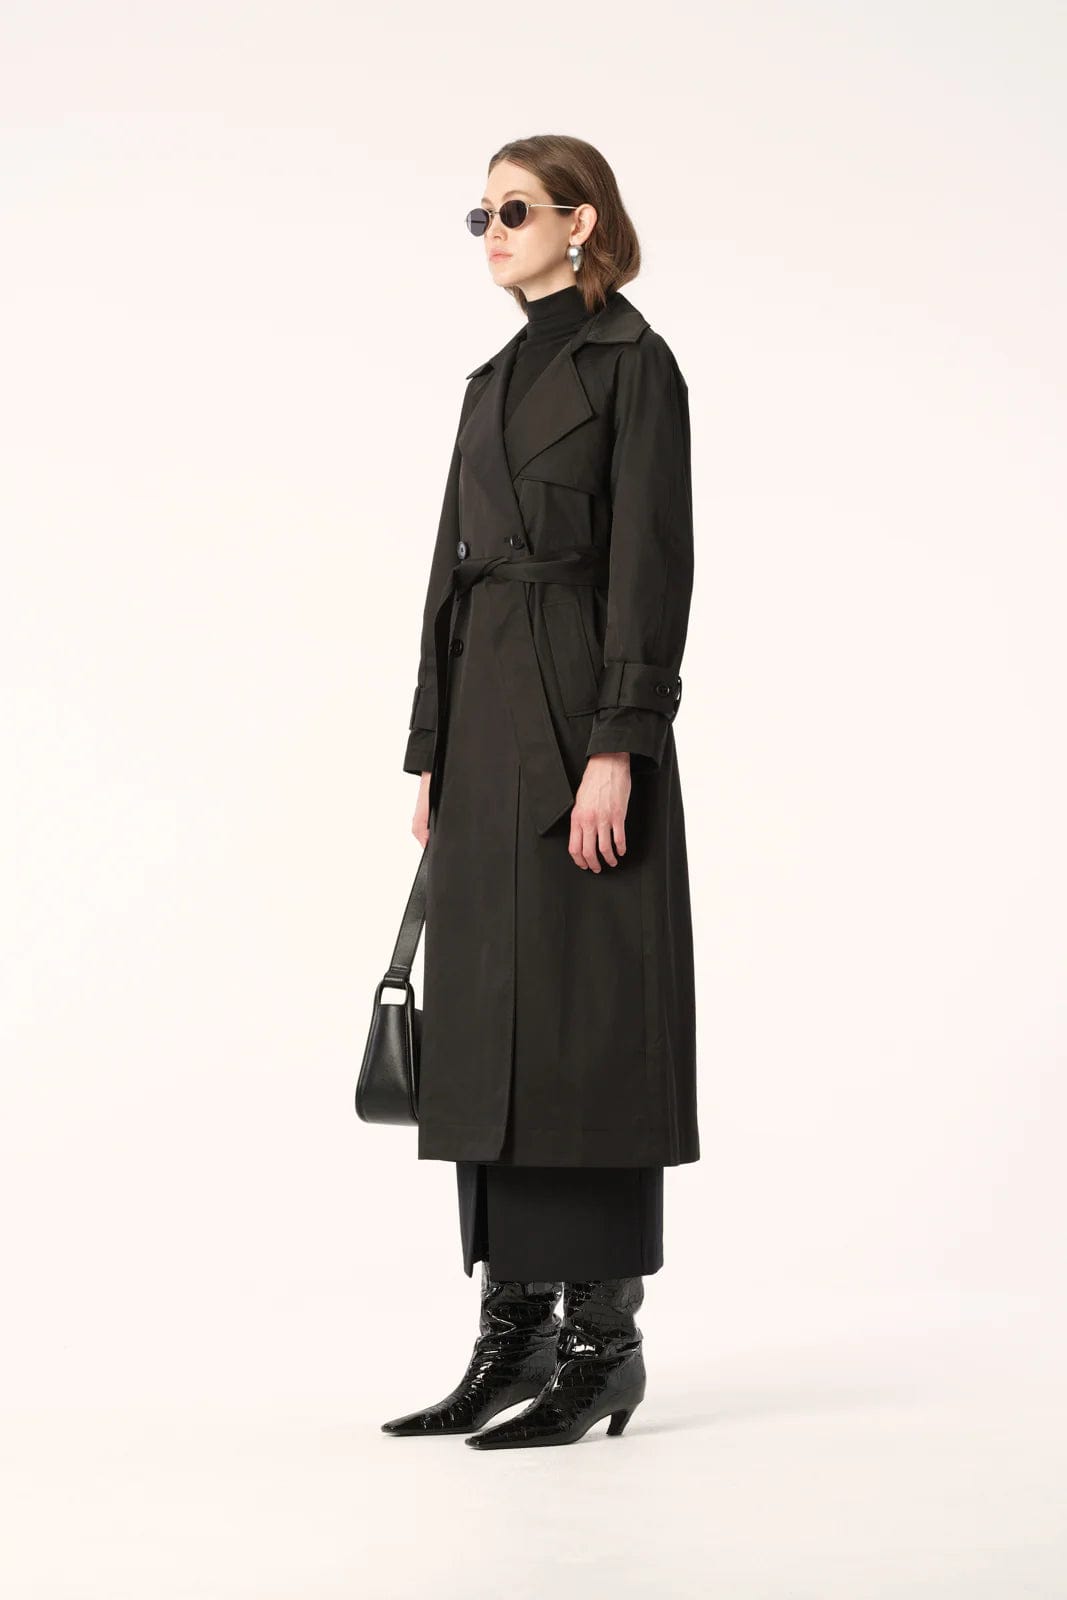 Elka Collective Coats - Trench Elka Collective | Shiro Trench - Black